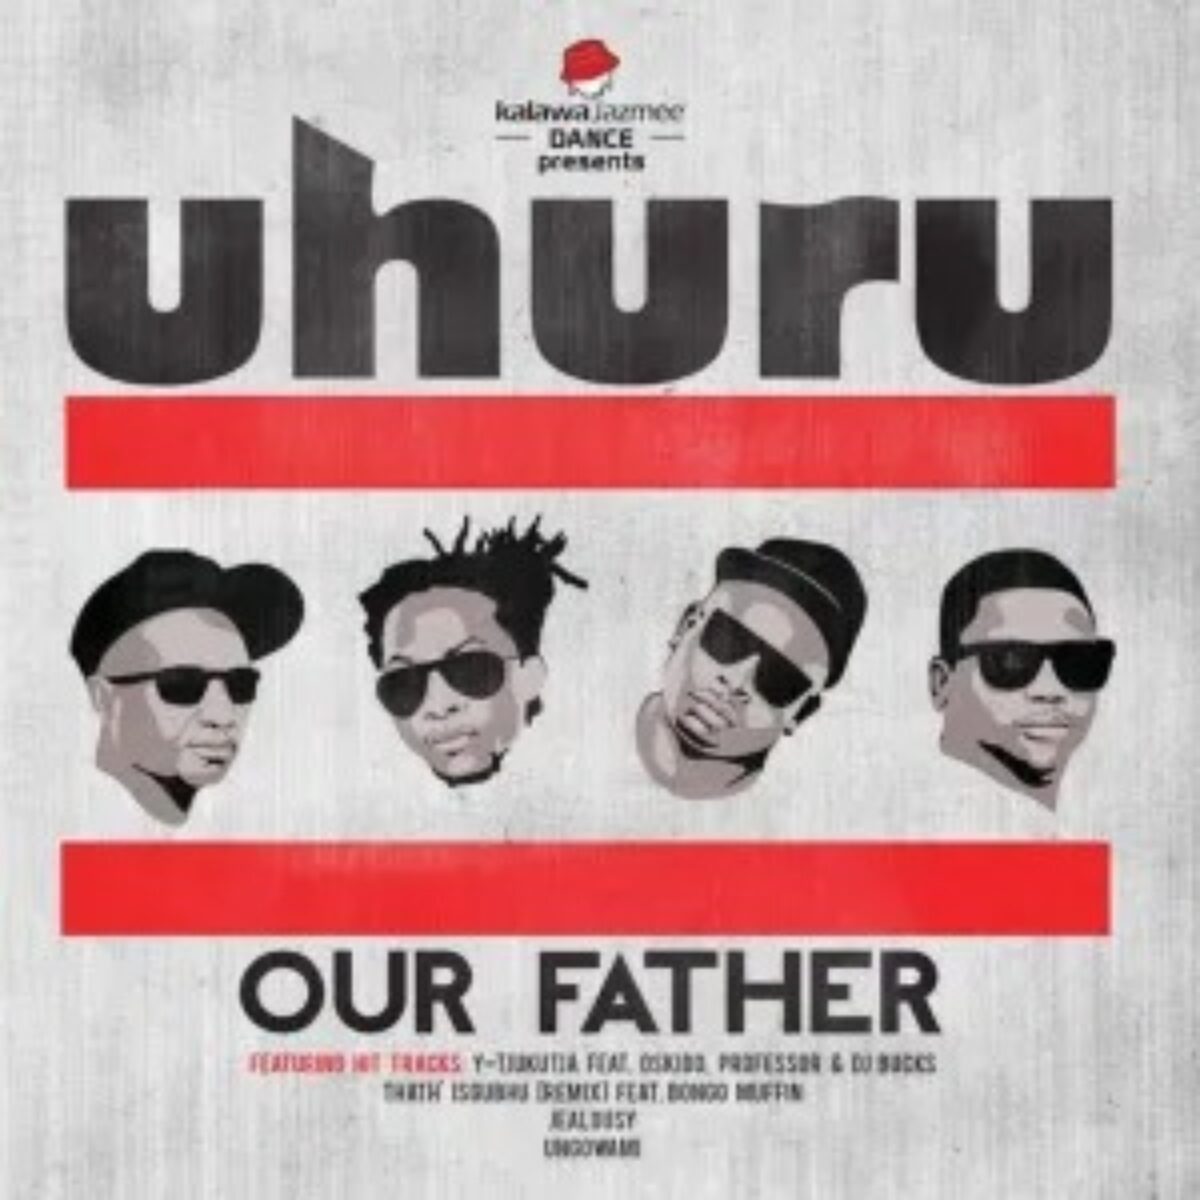 Our Father by Uhuru | Album